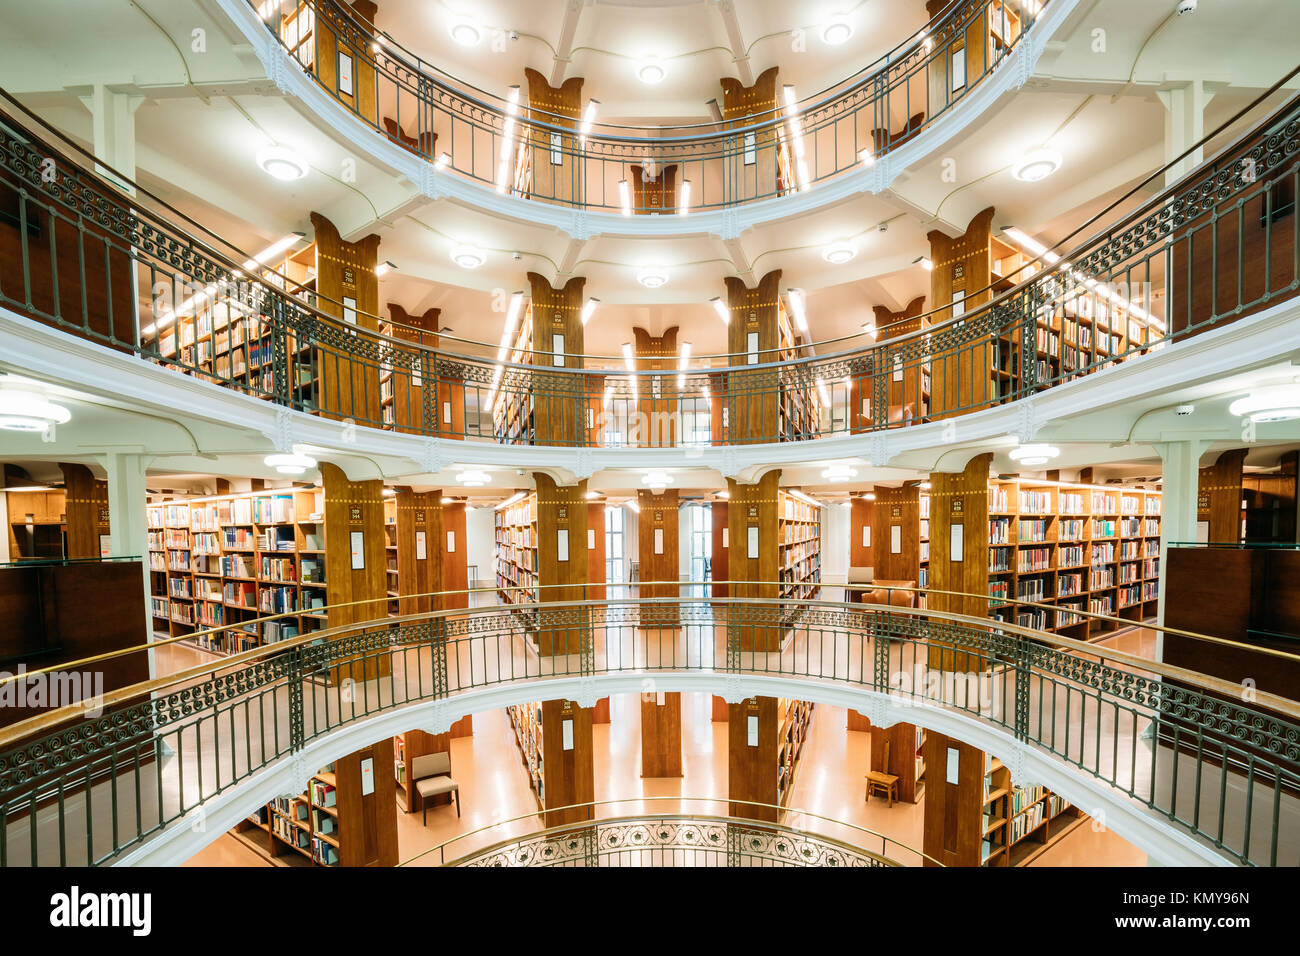 Helsinki, Finland. Interior Of The National Library Of Finland. Stock Photo